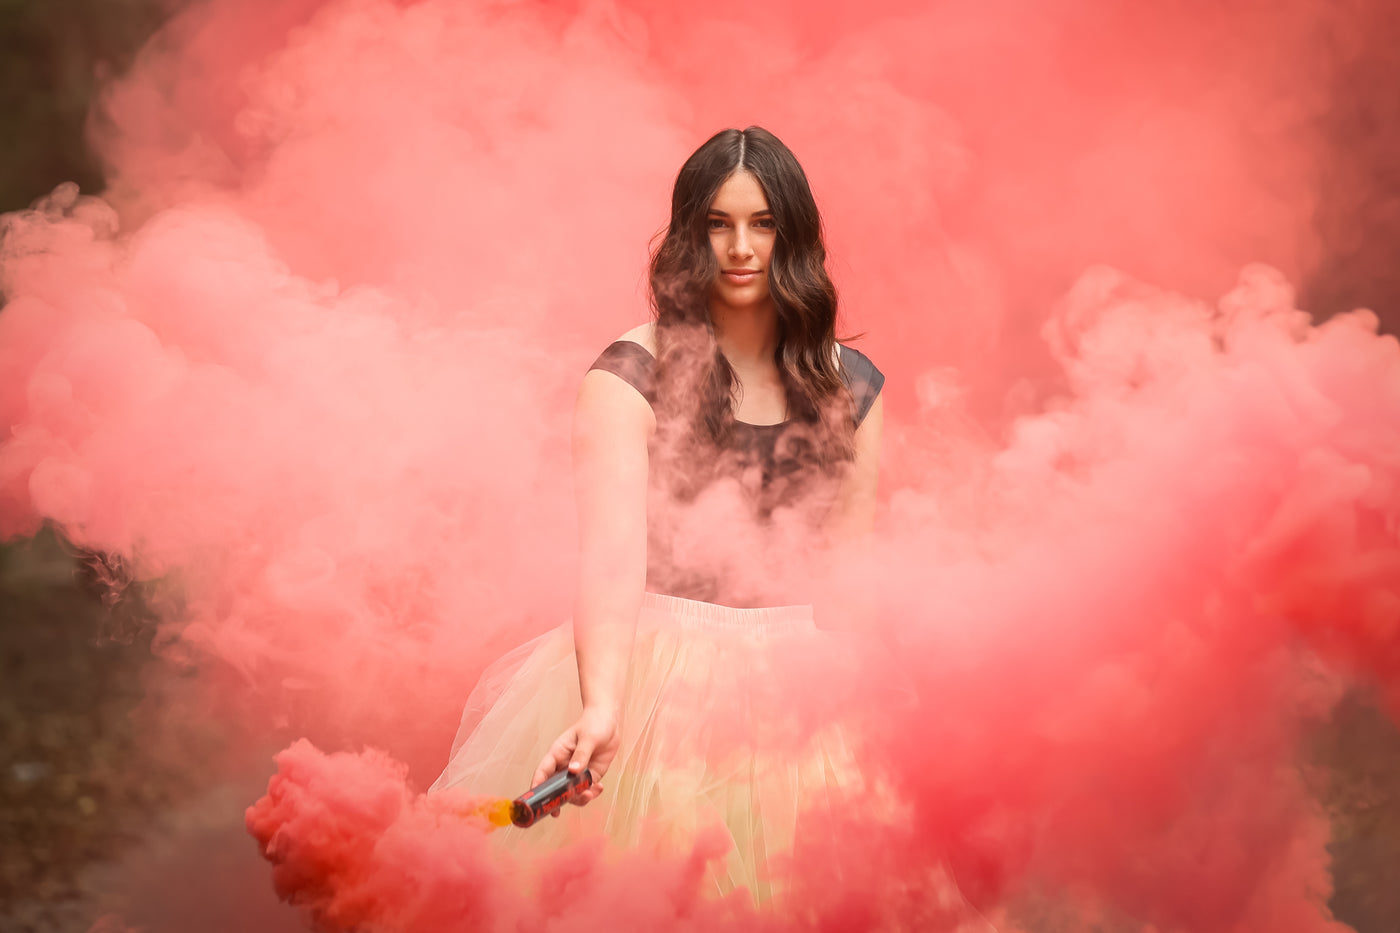 Colored Smoke Bombs For Photography - Pack of 5 at Rs 690.00